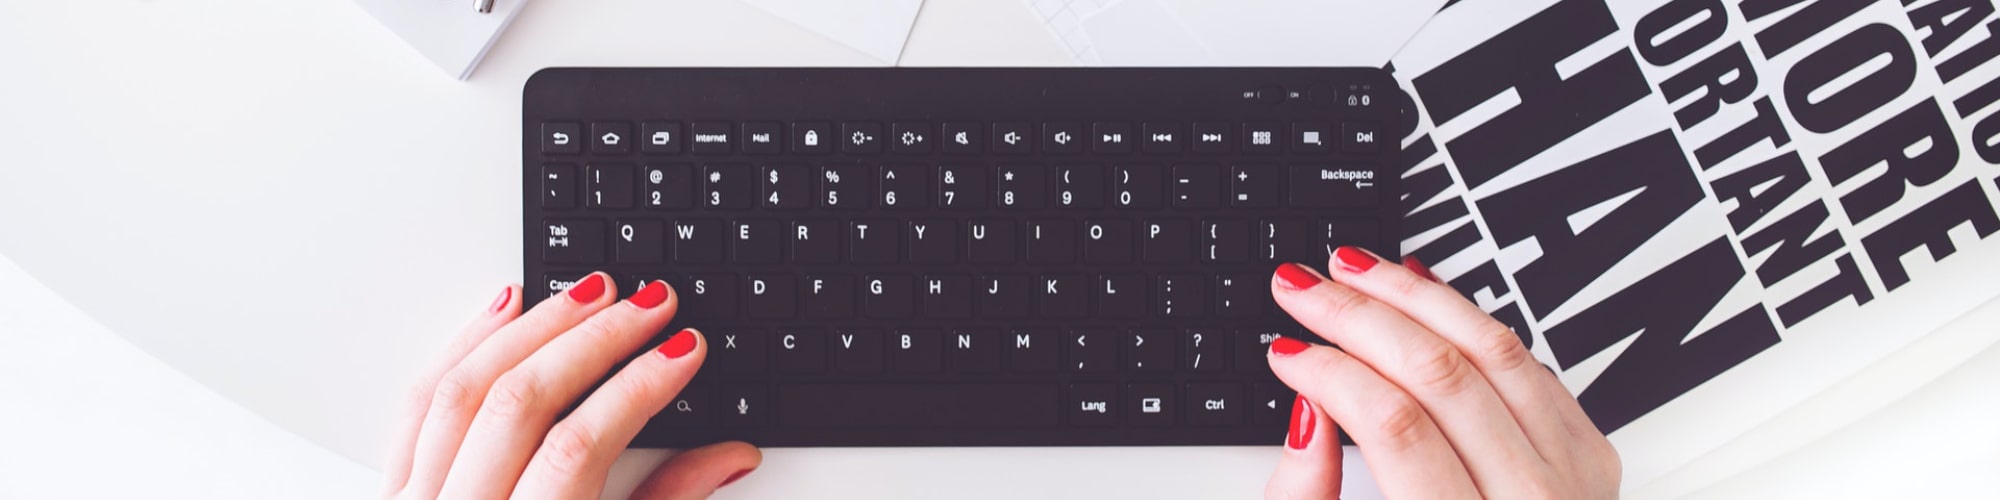 Womans hands writing on black keyboard